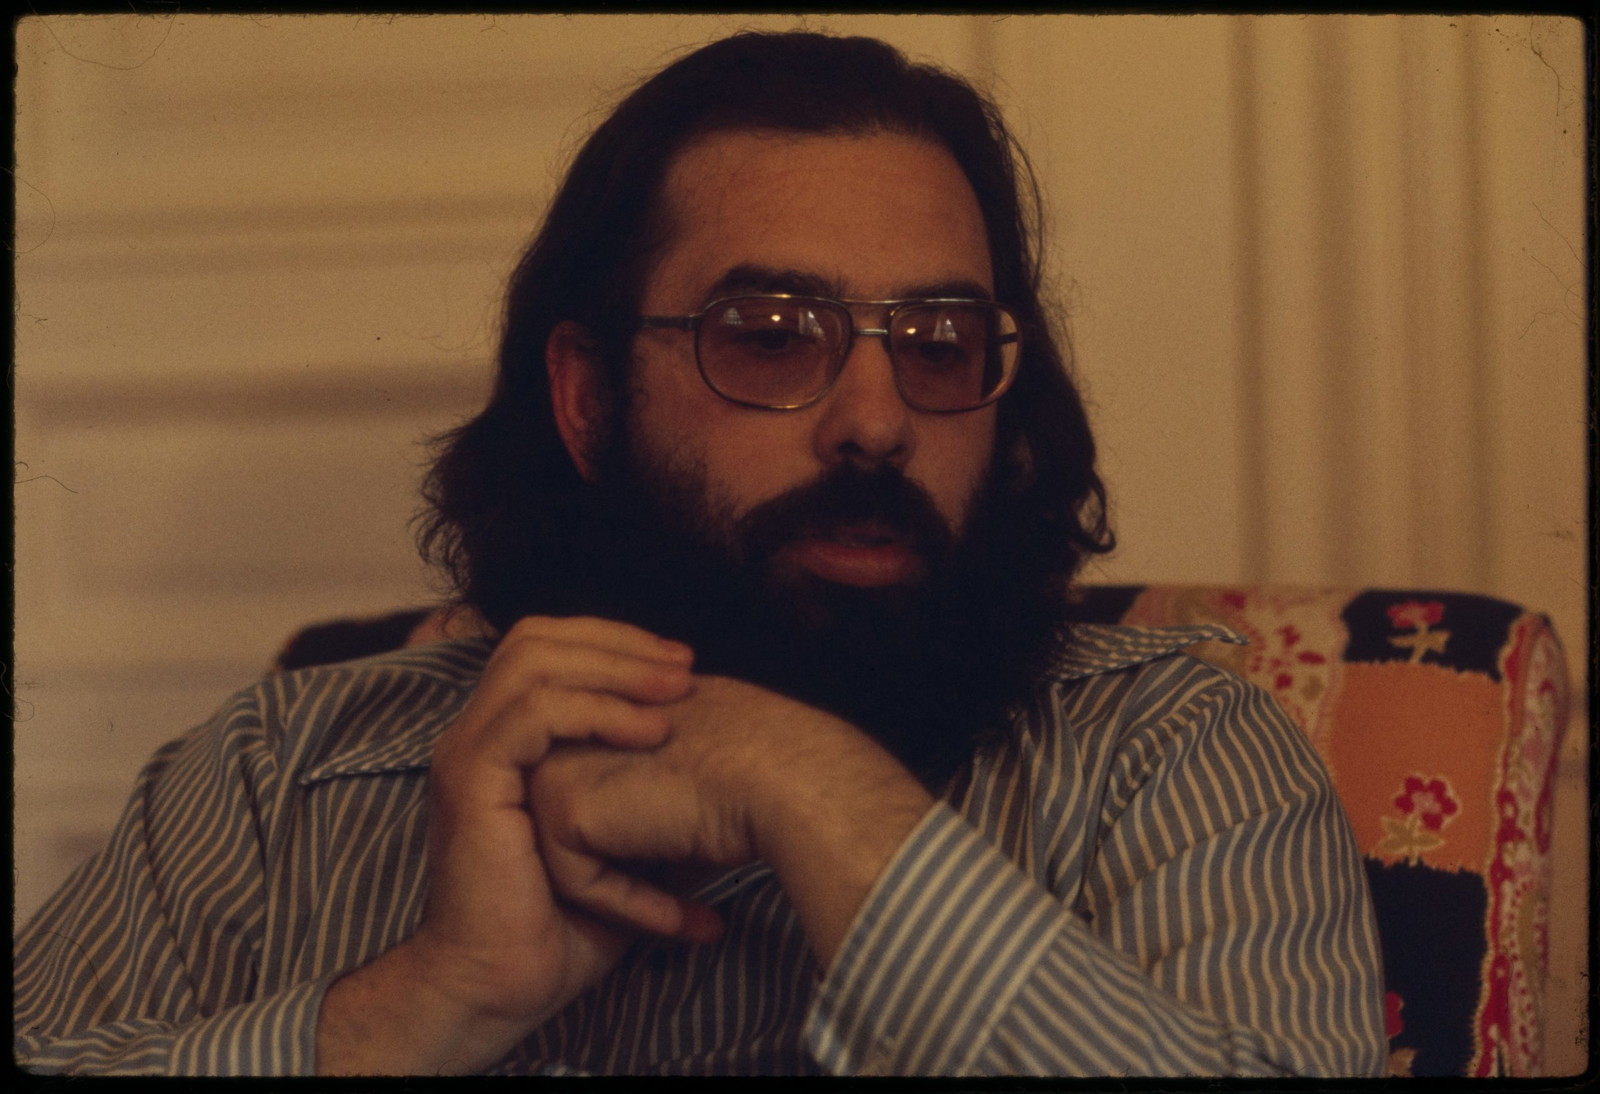 Francis Ford Coppola in his early days (via Wikimedia Commons)